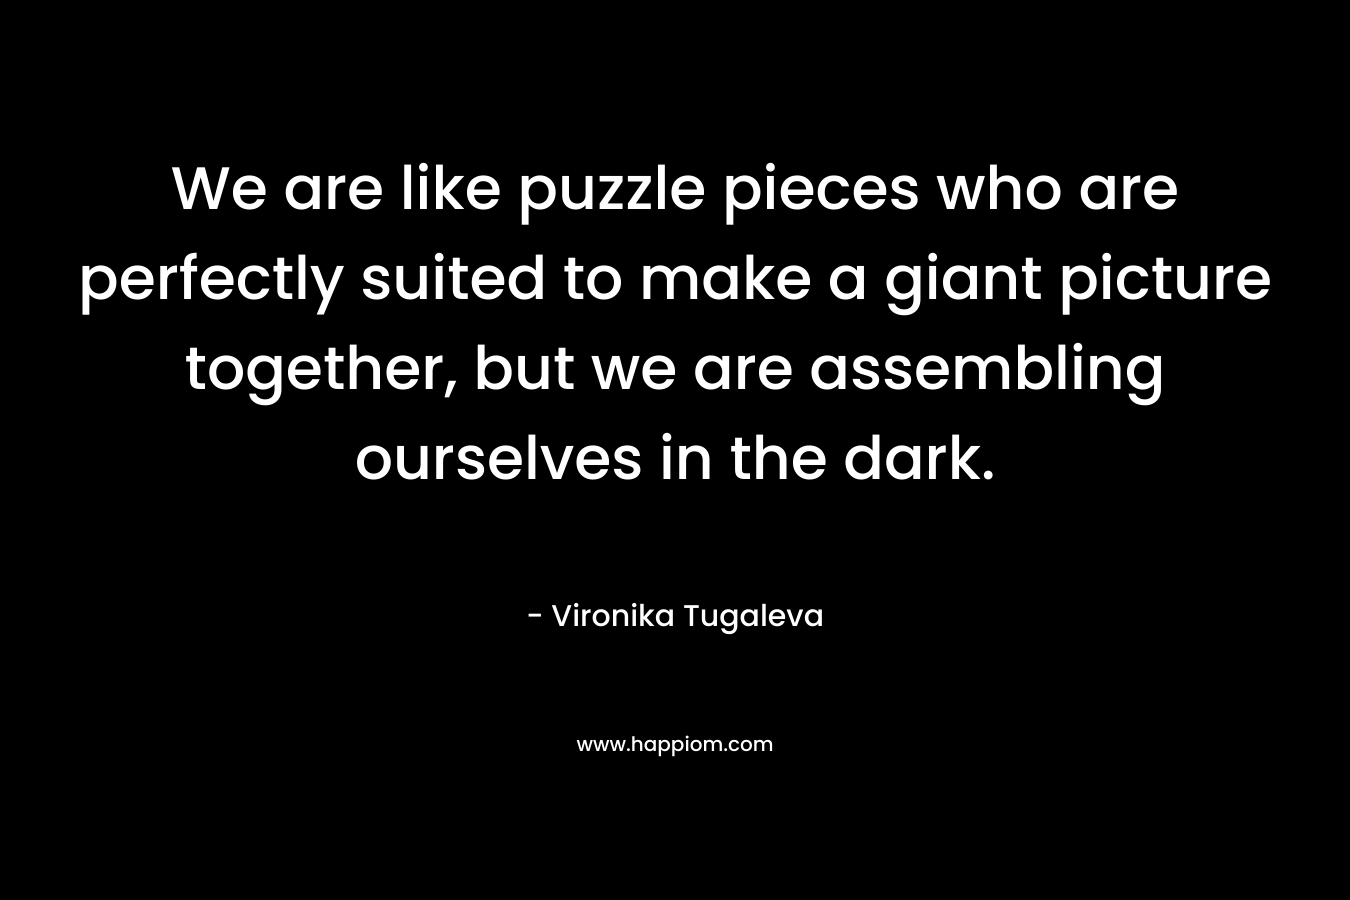 We are like puzzle pieces who are perfectly suited to make a giant picture together, but we are assembling ourselves in the dark.